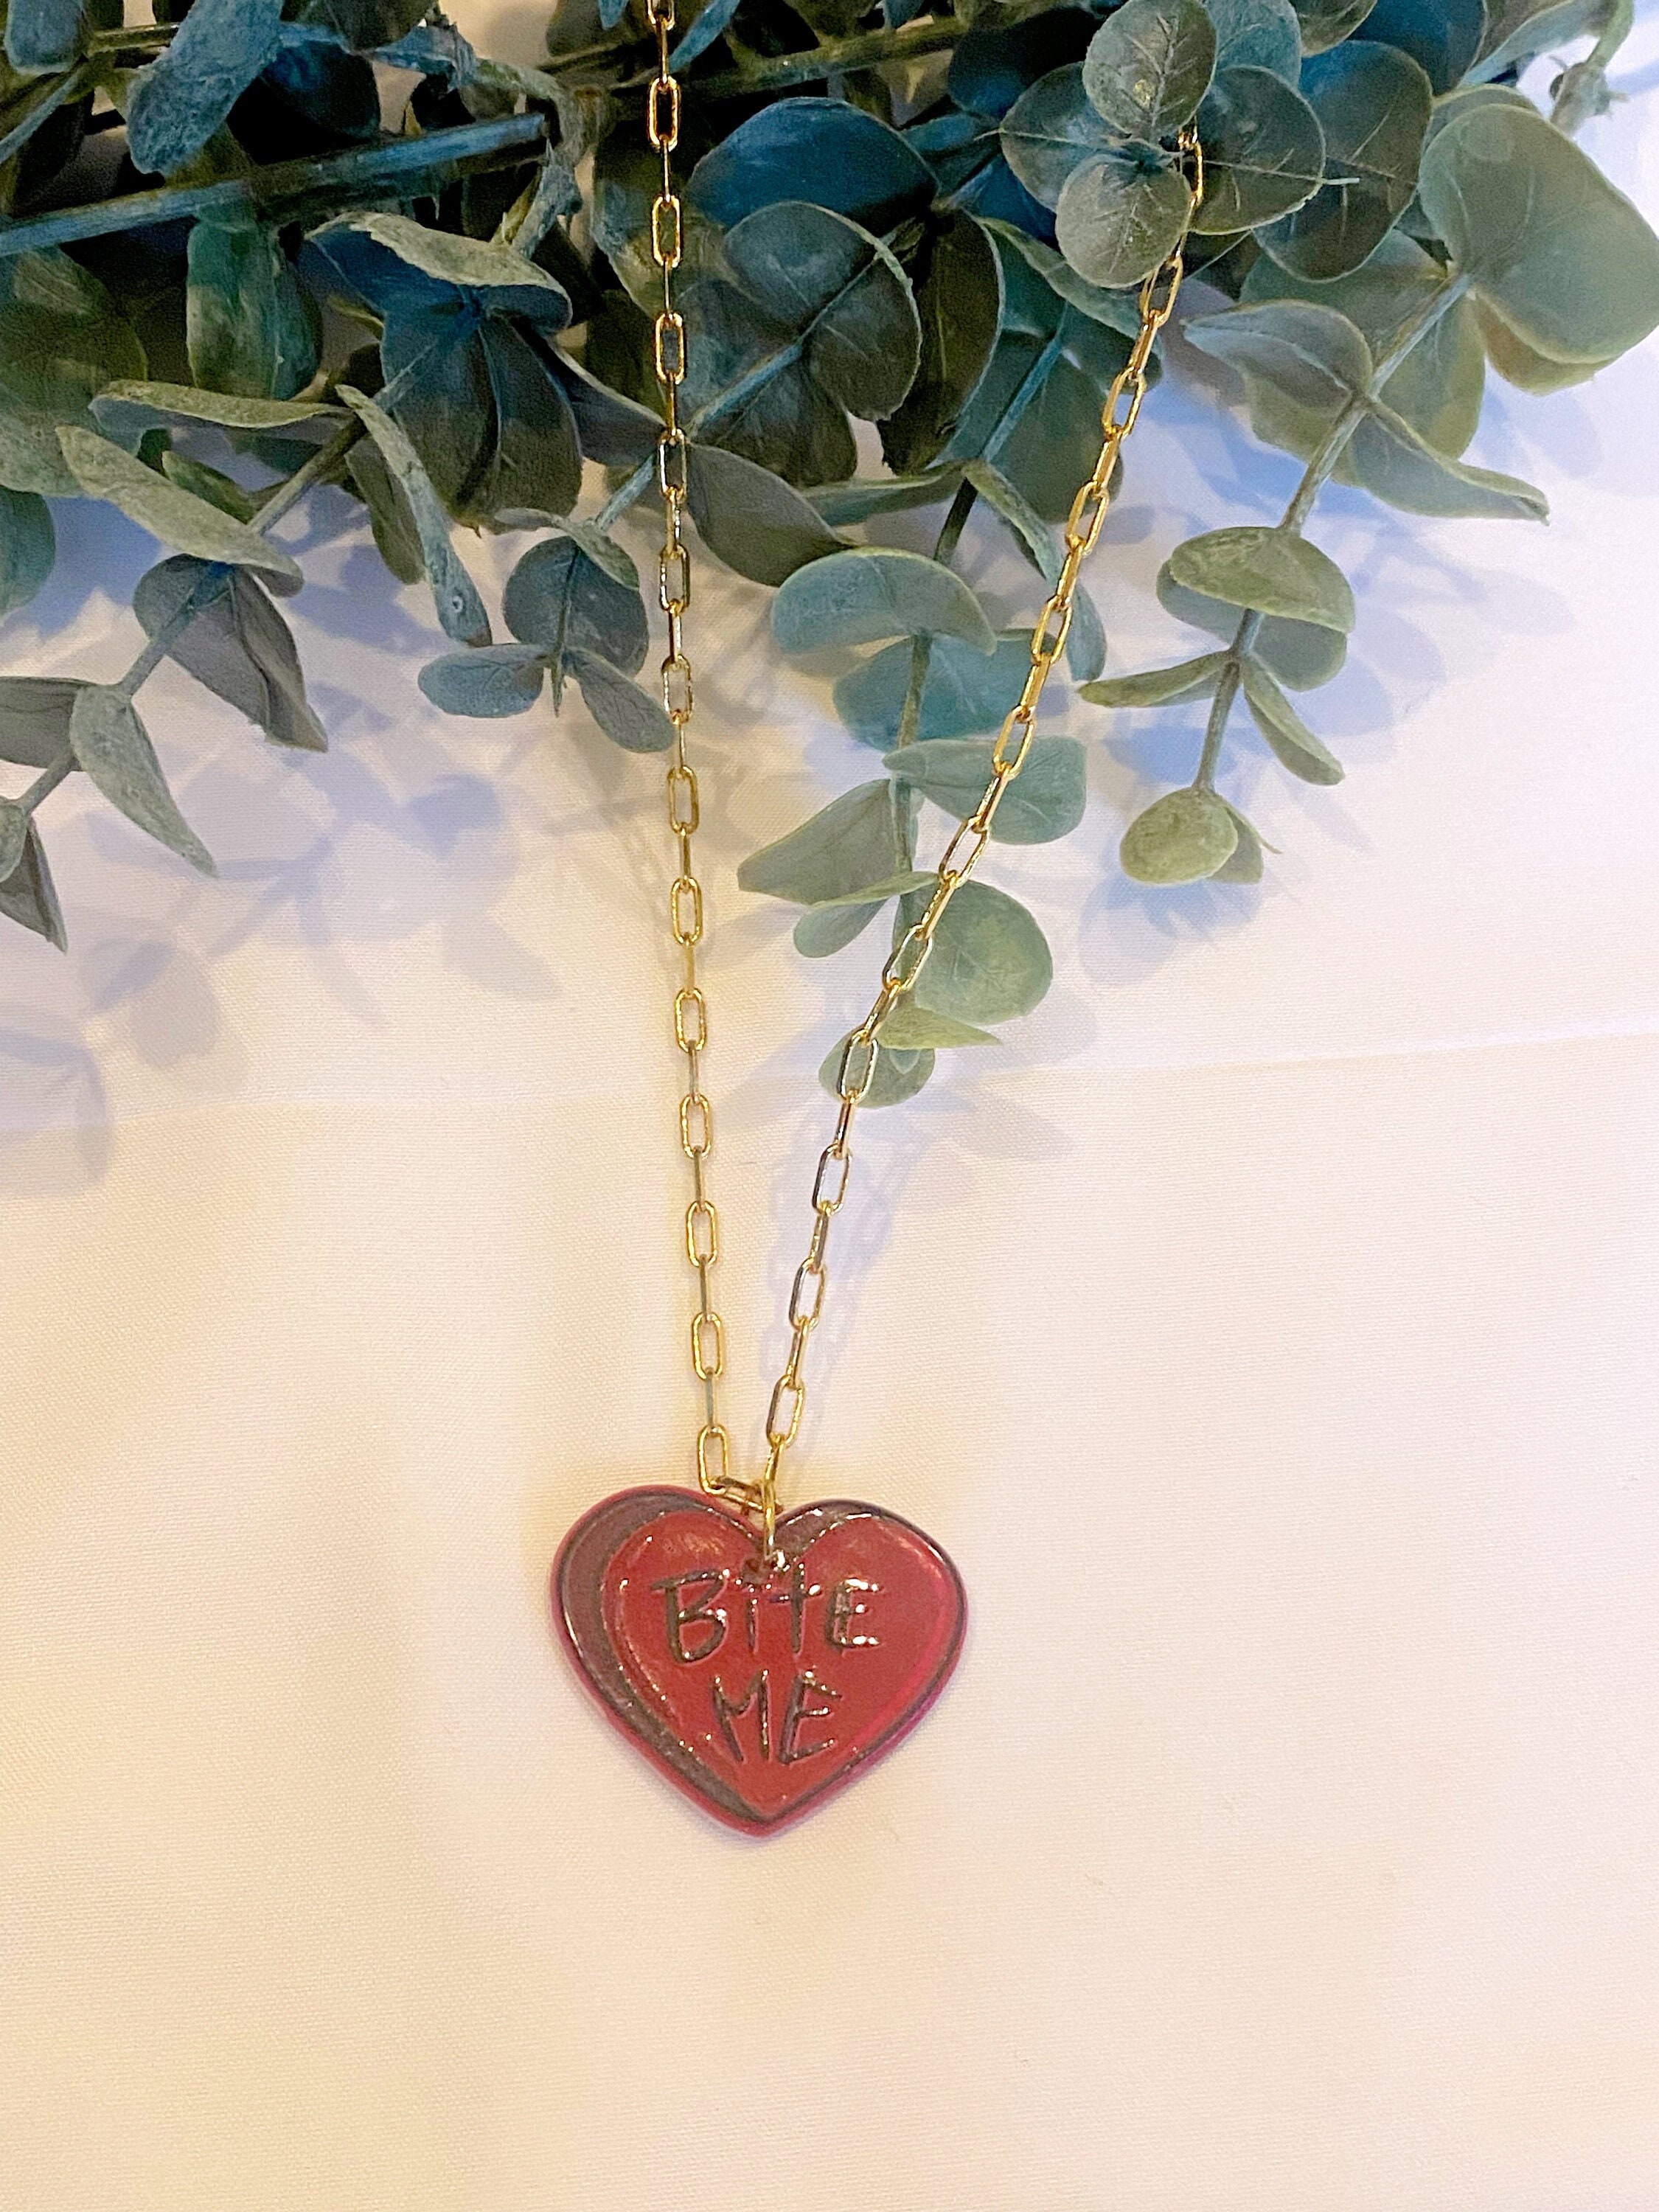 Large Acrylic Heart Pendant Necklace bite Me Gold Plated 